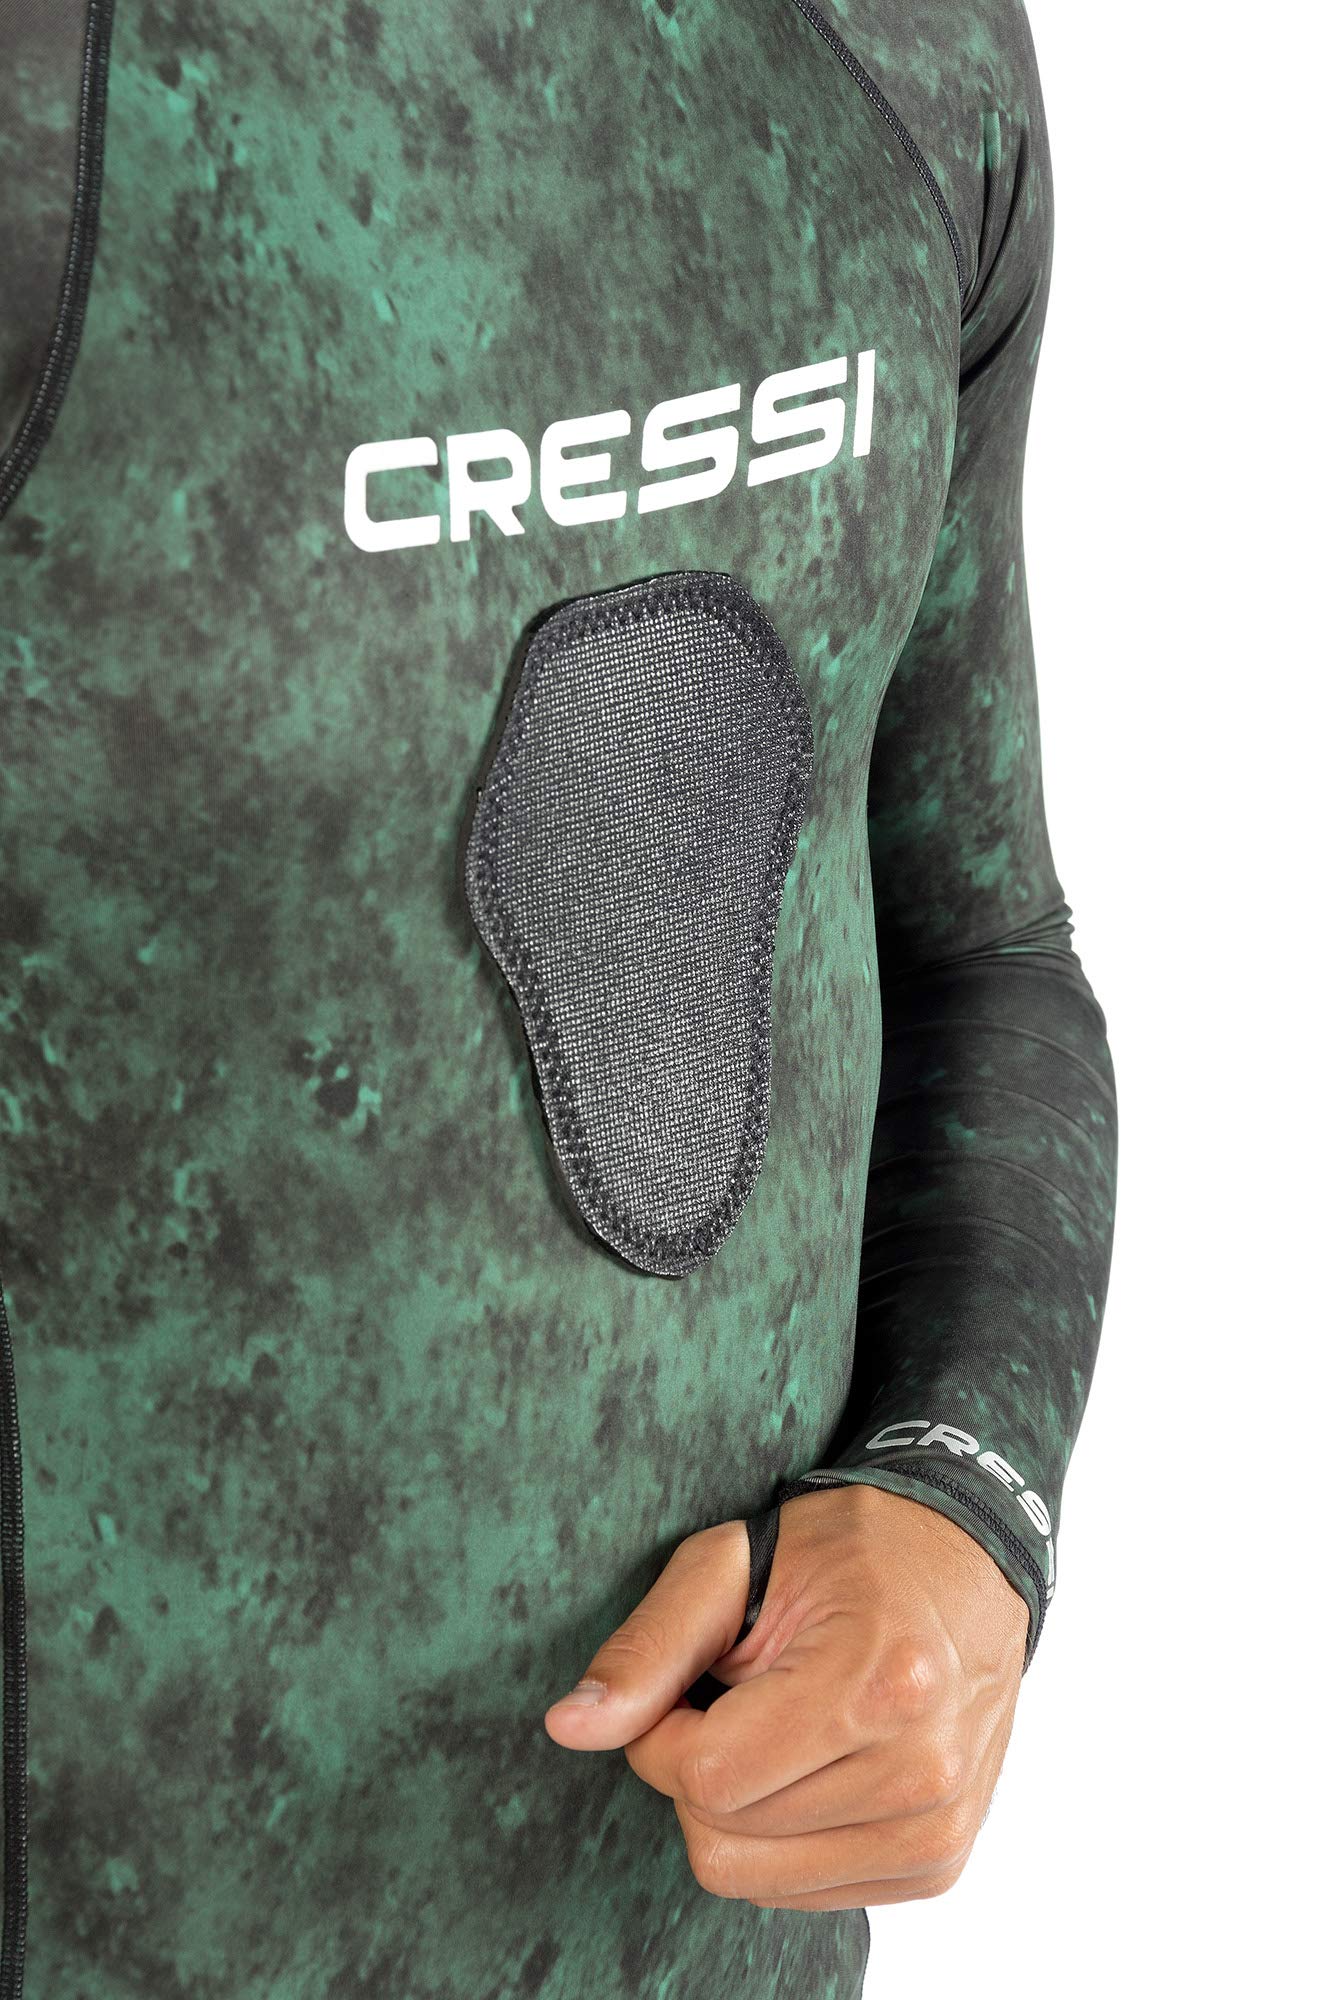 Cressi Camouflage Rash Guard for Scuba Diving Videomakers and Spearfishing - Crew-Neck- get the Hunter equipment